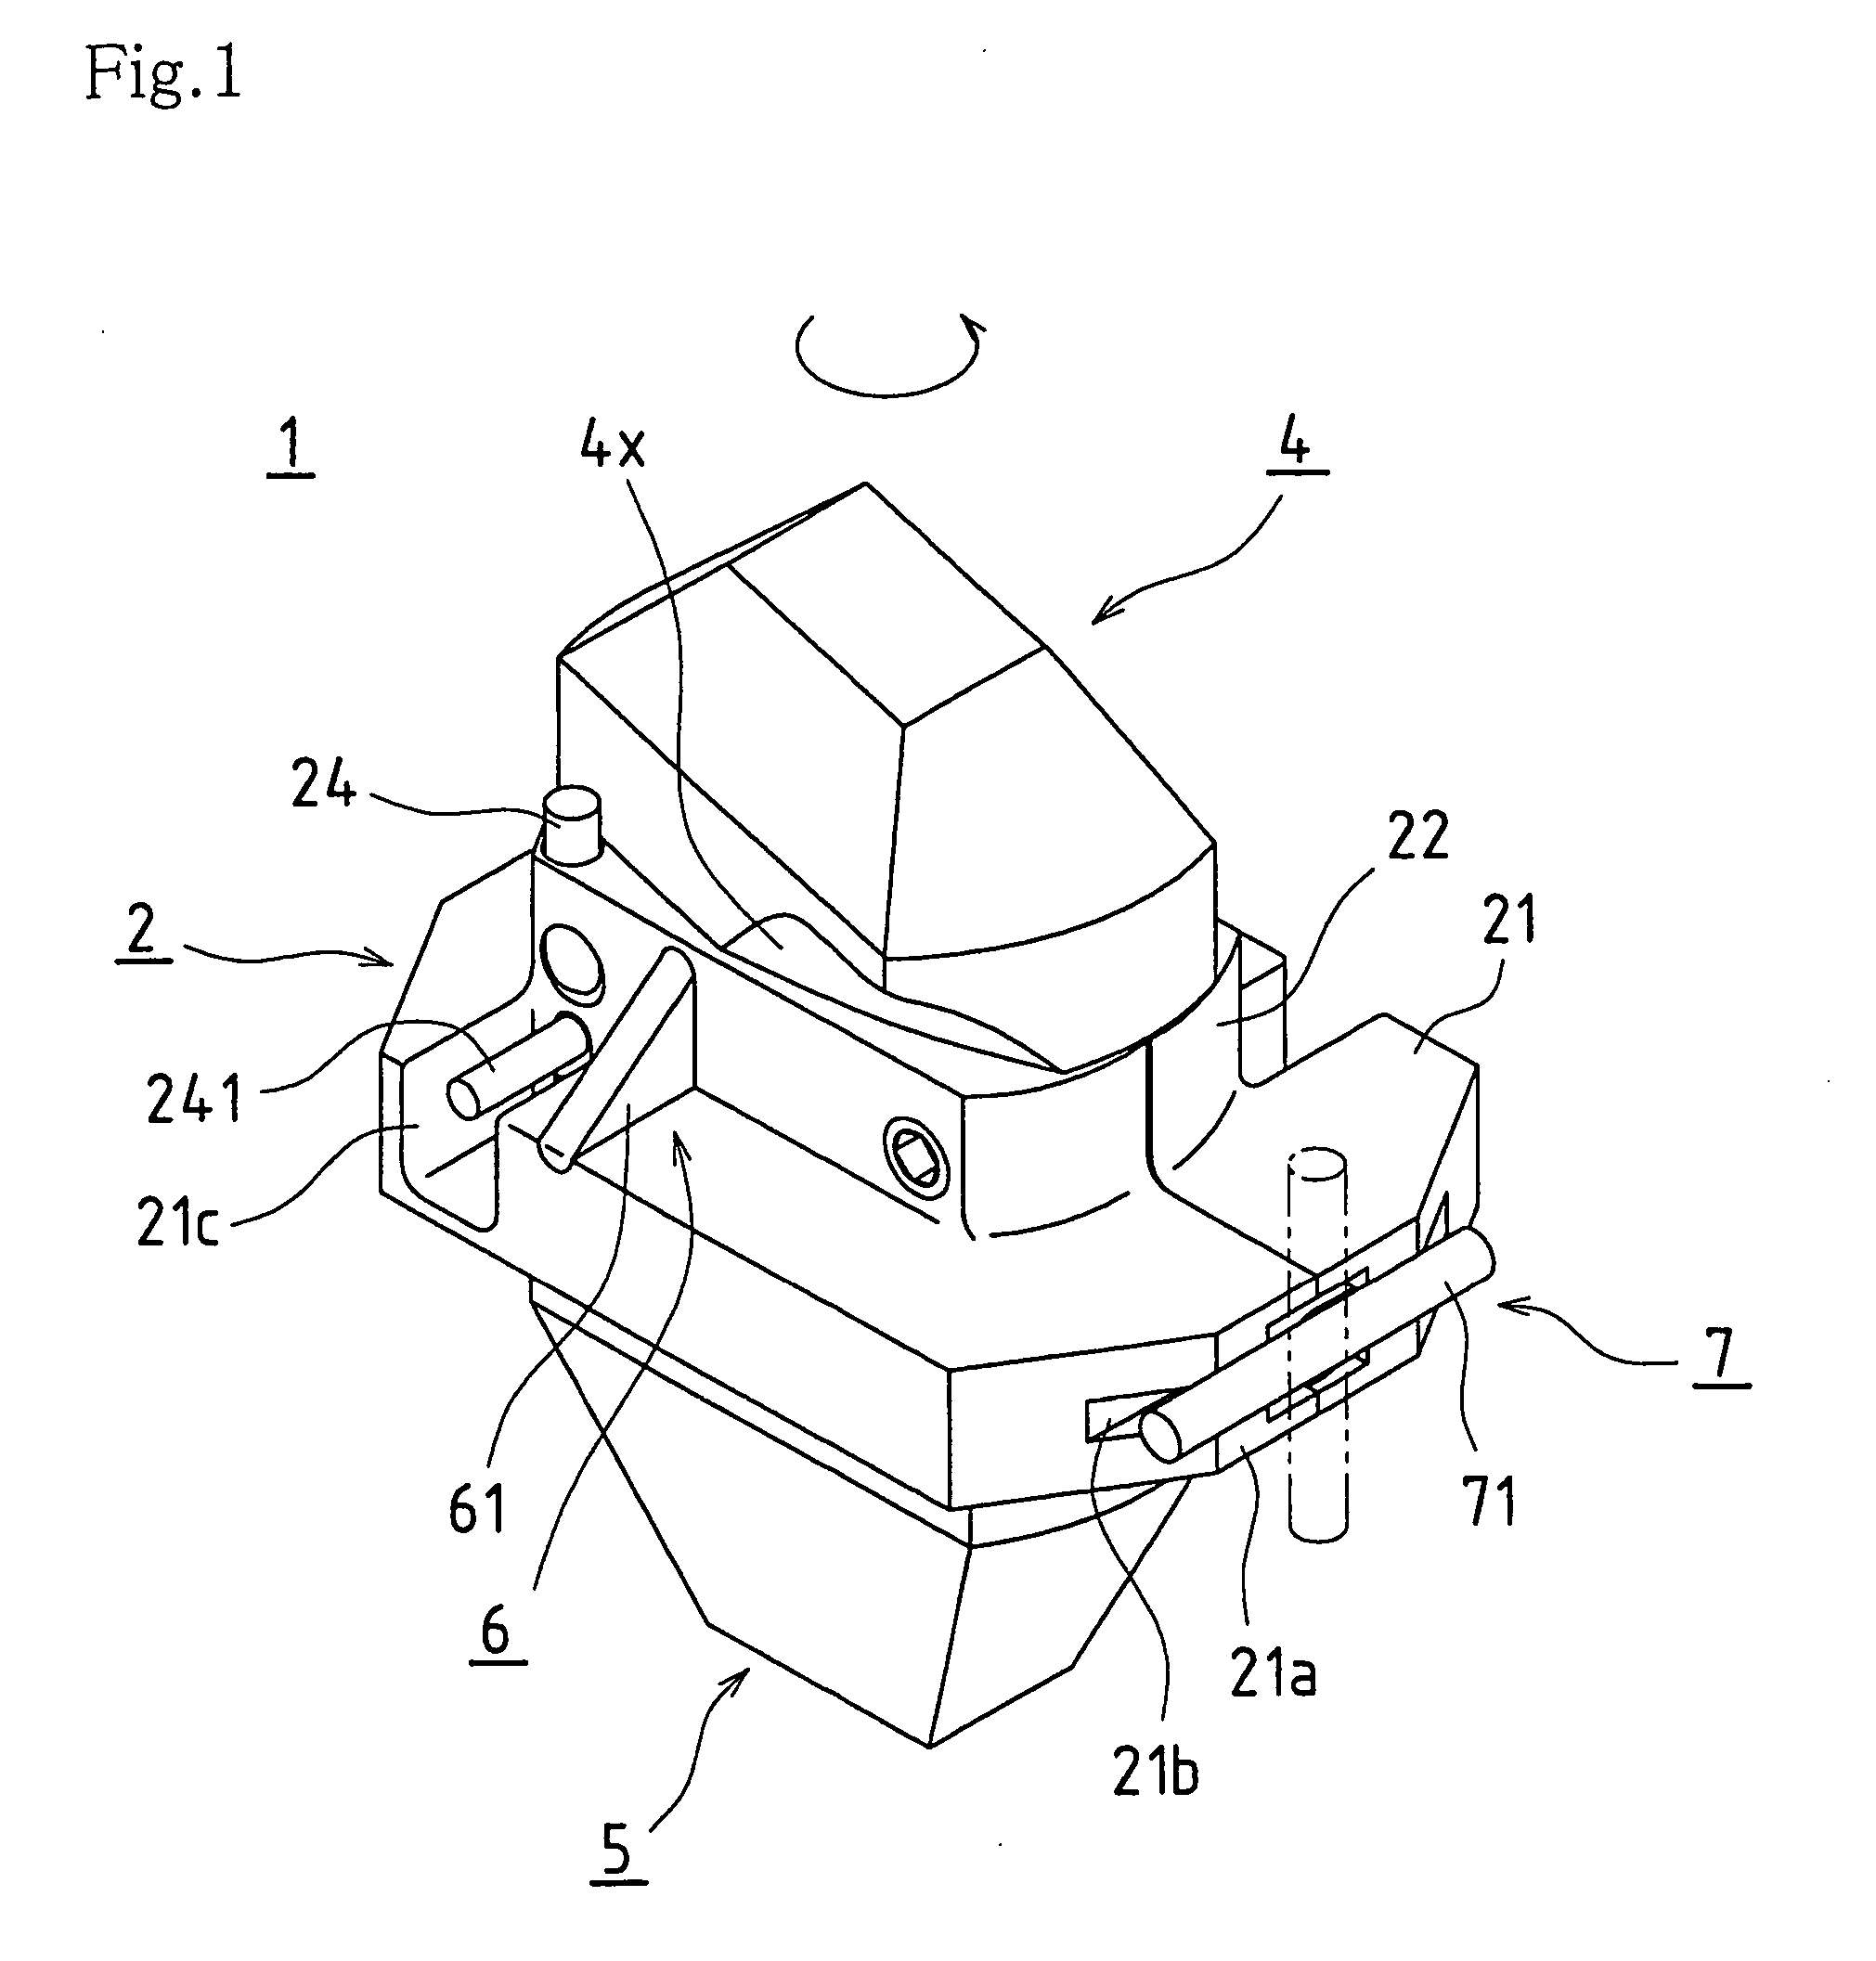 Container connecting metal fixture